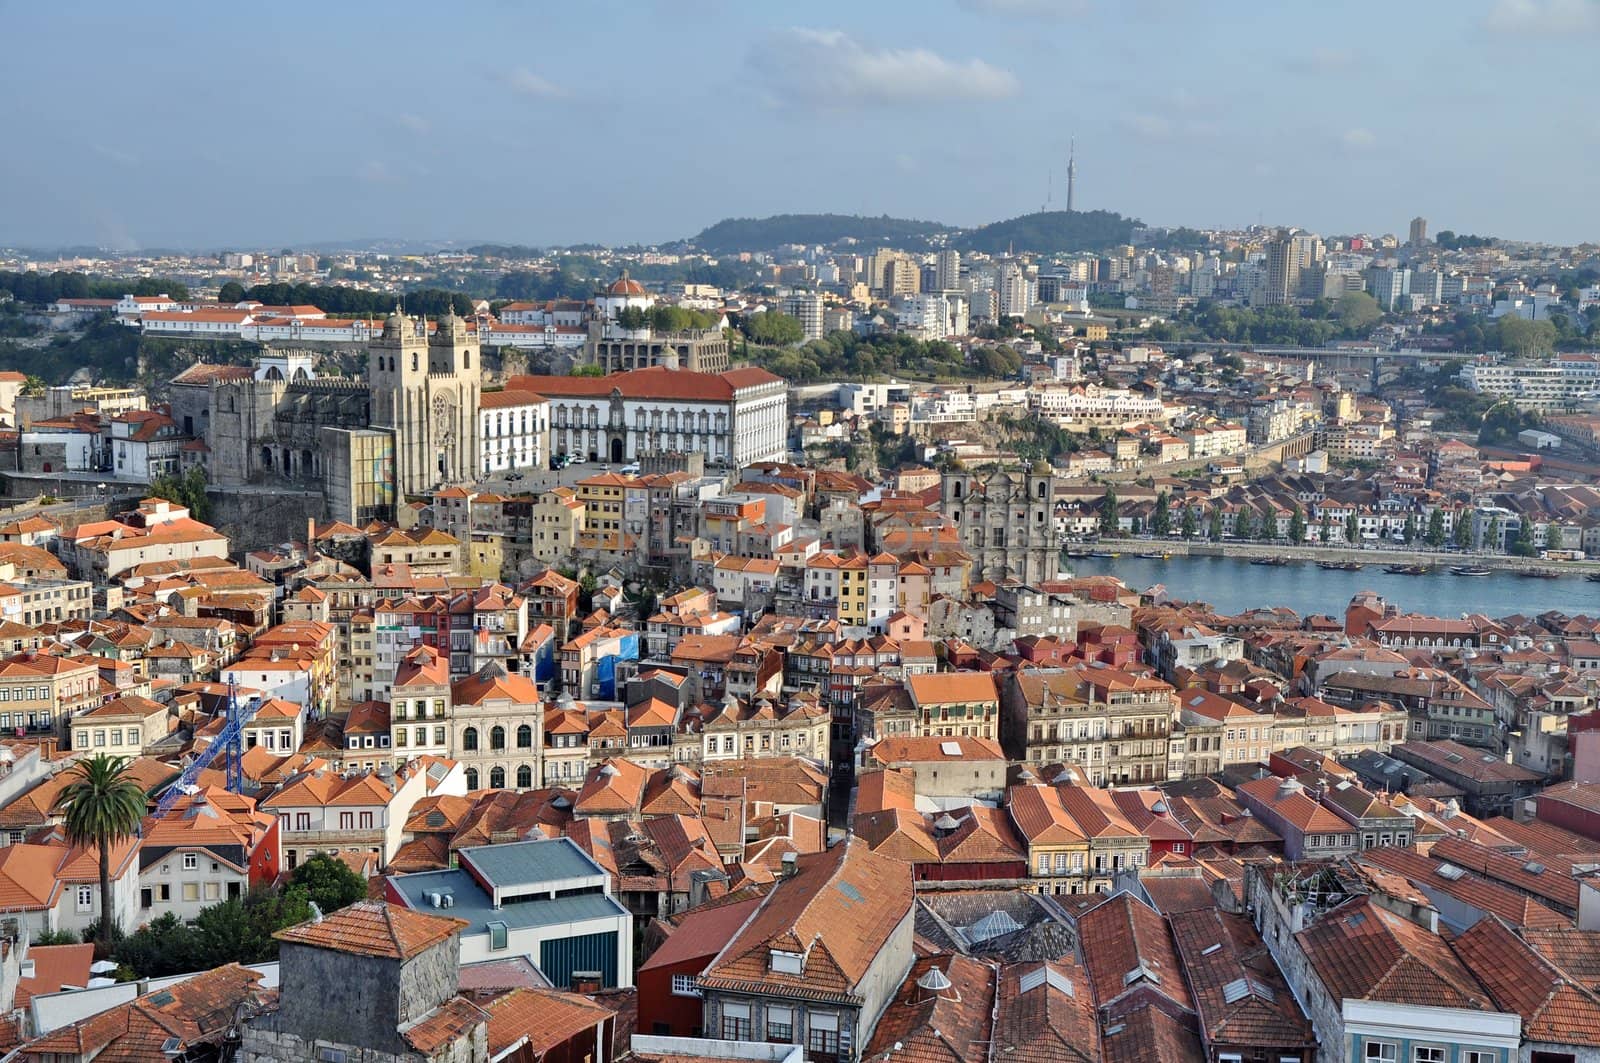 City of Porto (Portugal) from above by anderm